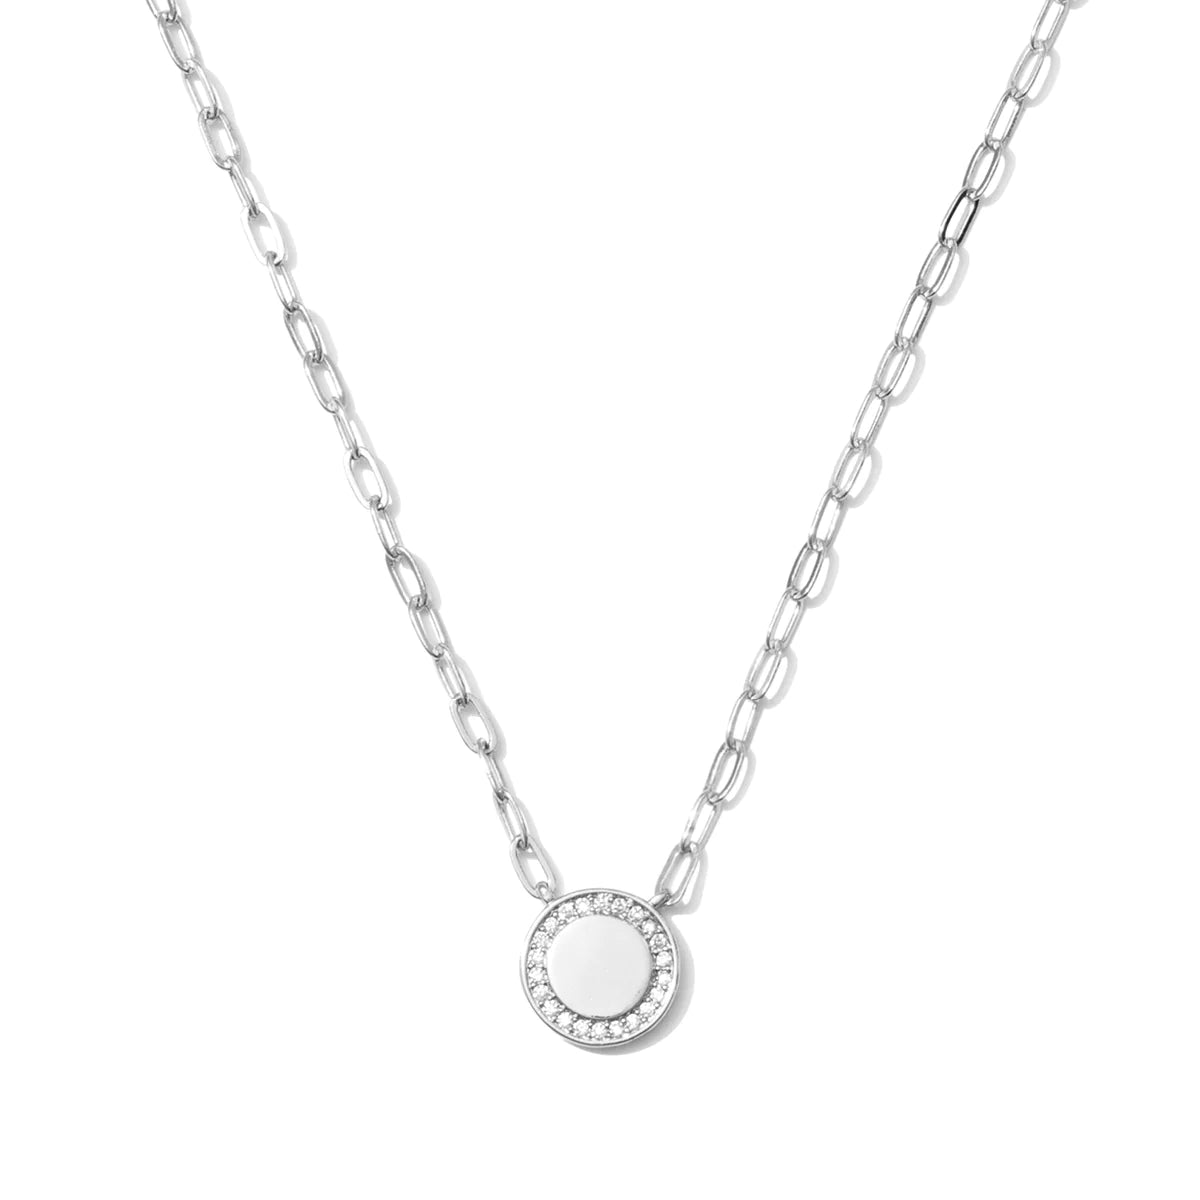 Pave Accented Disc Link Chain Necklace Silver